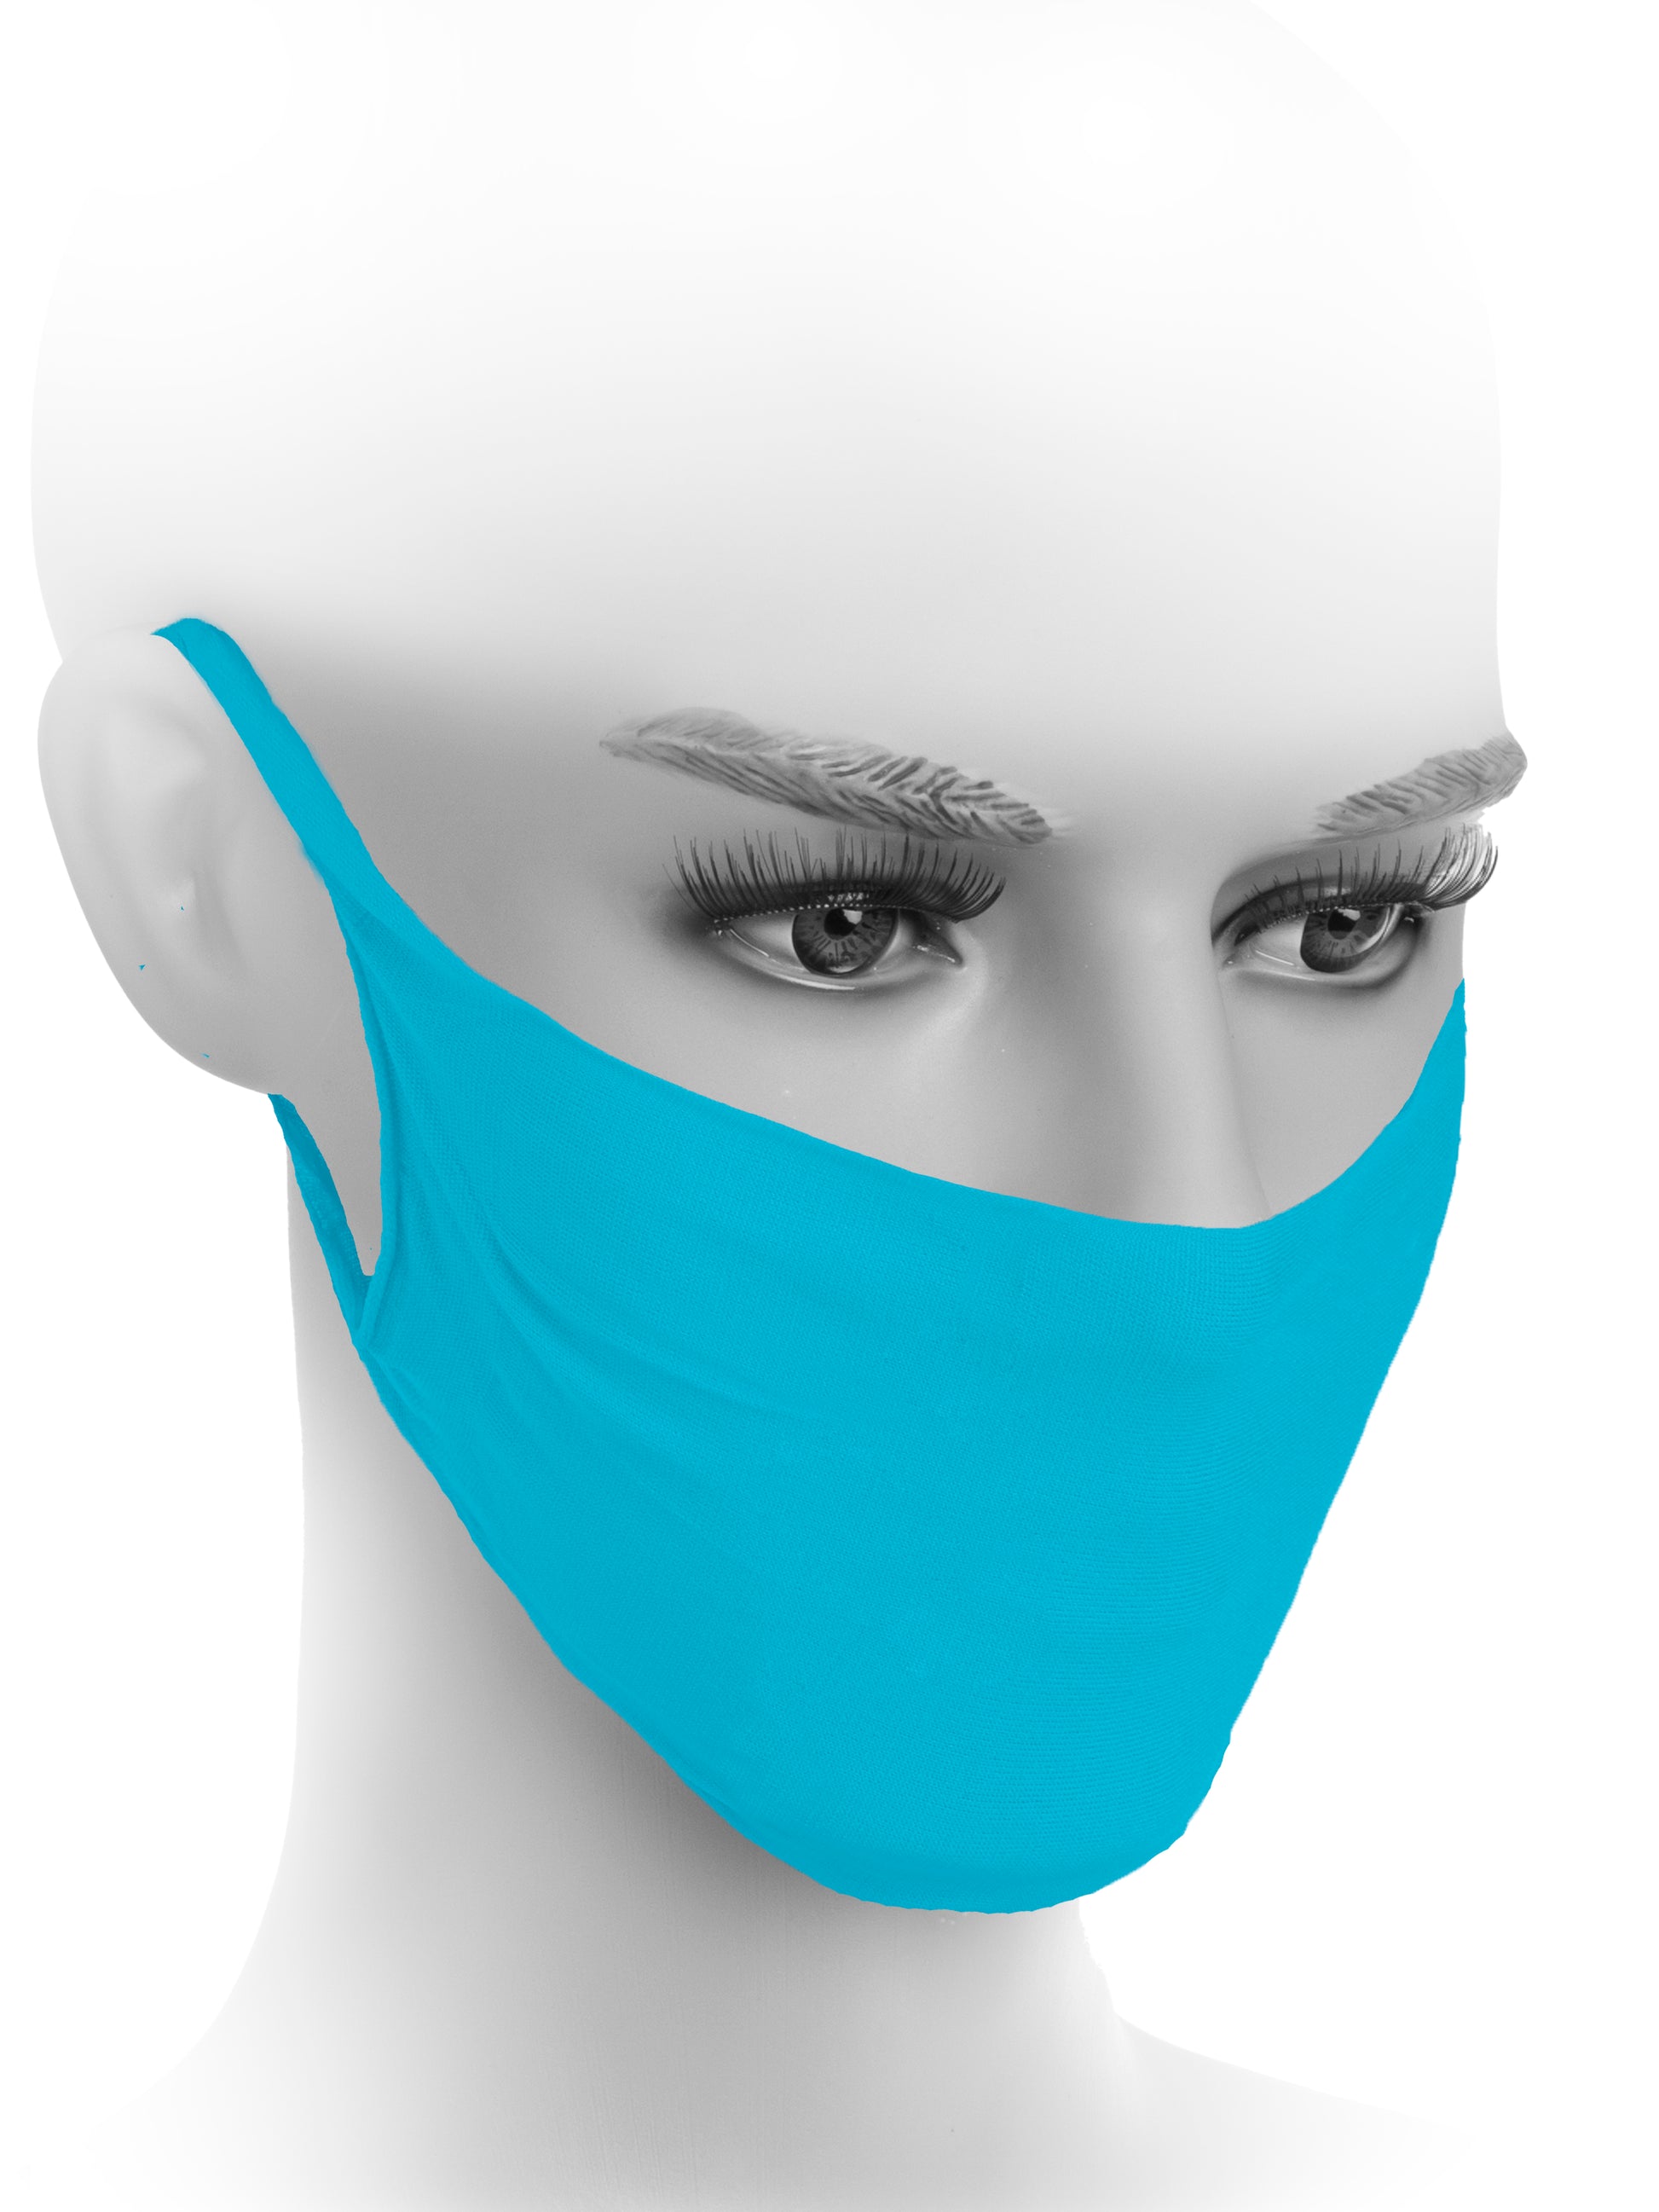 Fiore Hygiene Face Mask M0001 - face covering in light blue